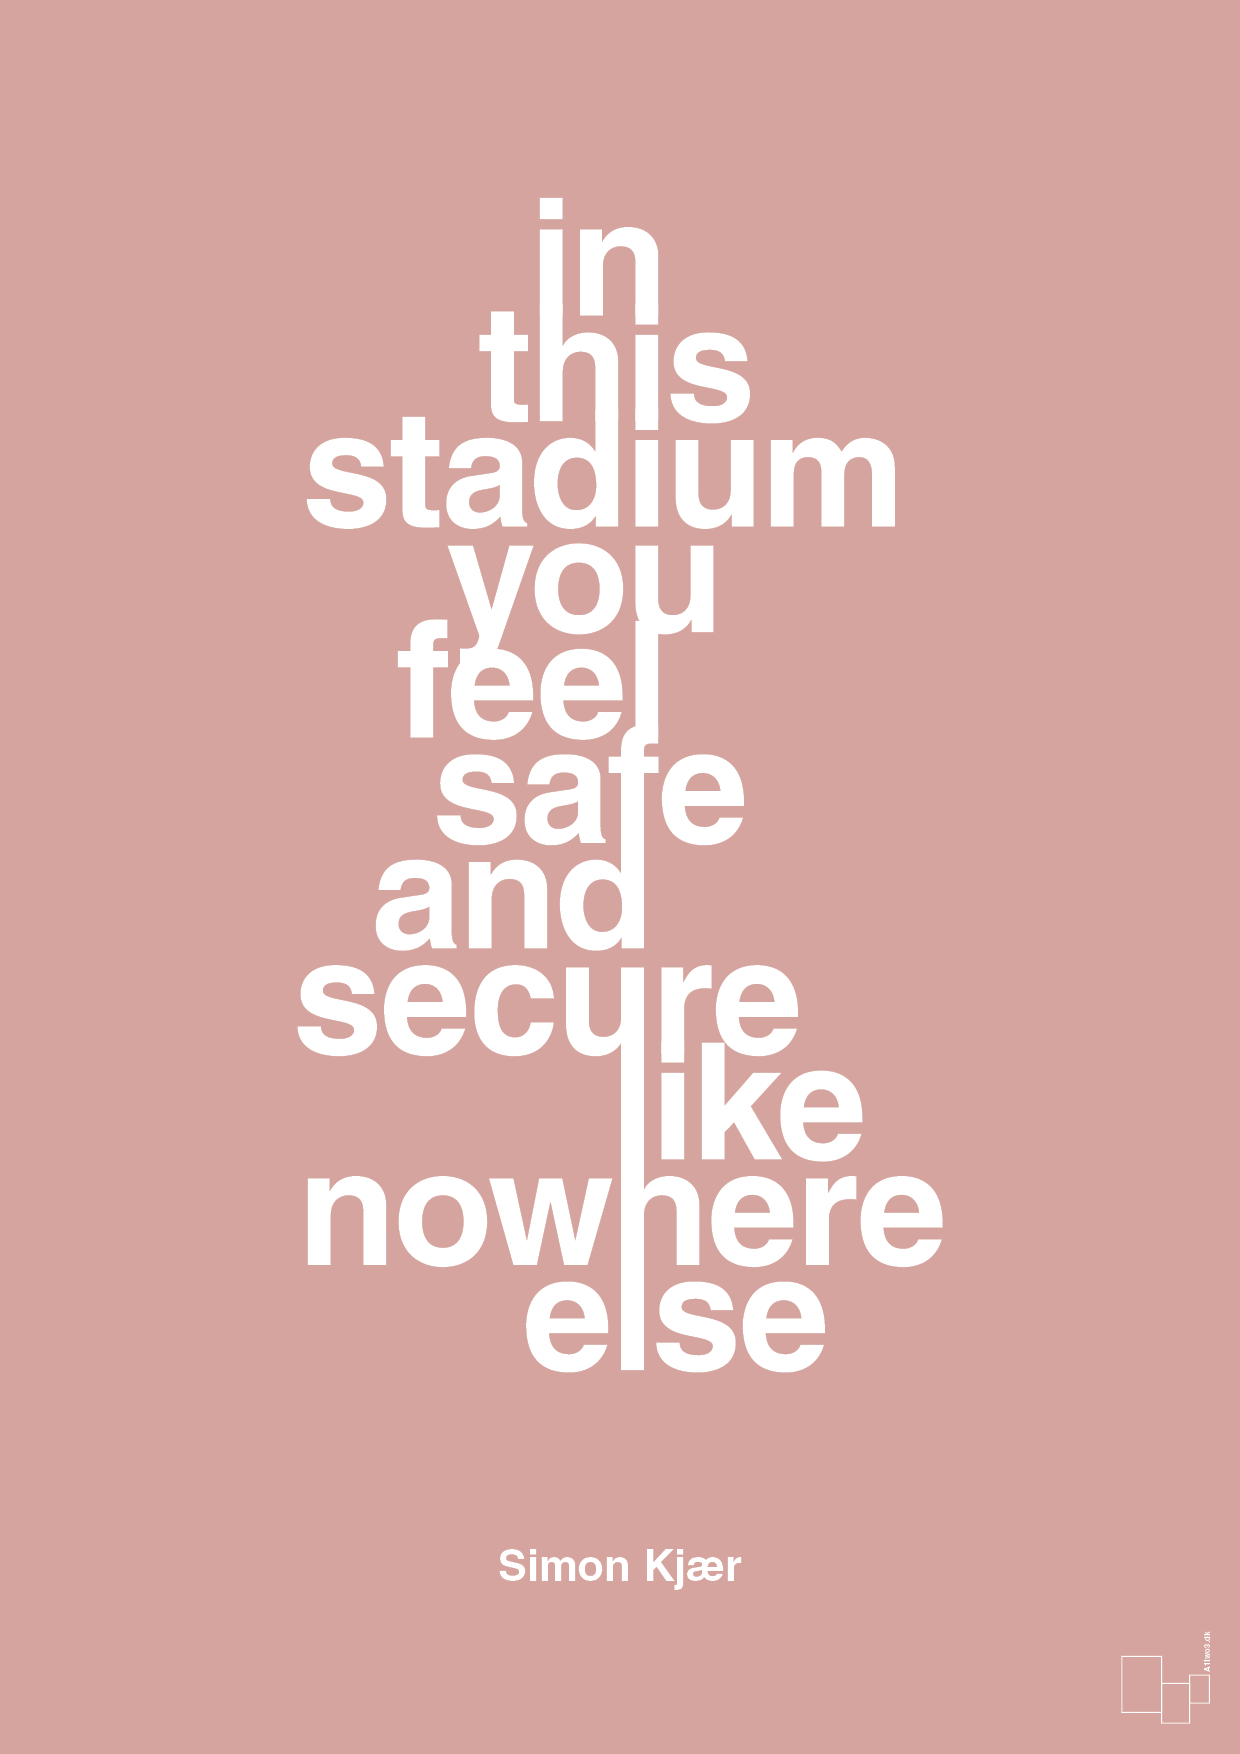 in this stadium you feel safe and secure like nowhere else - Plakat med Citater i Bubble Shell